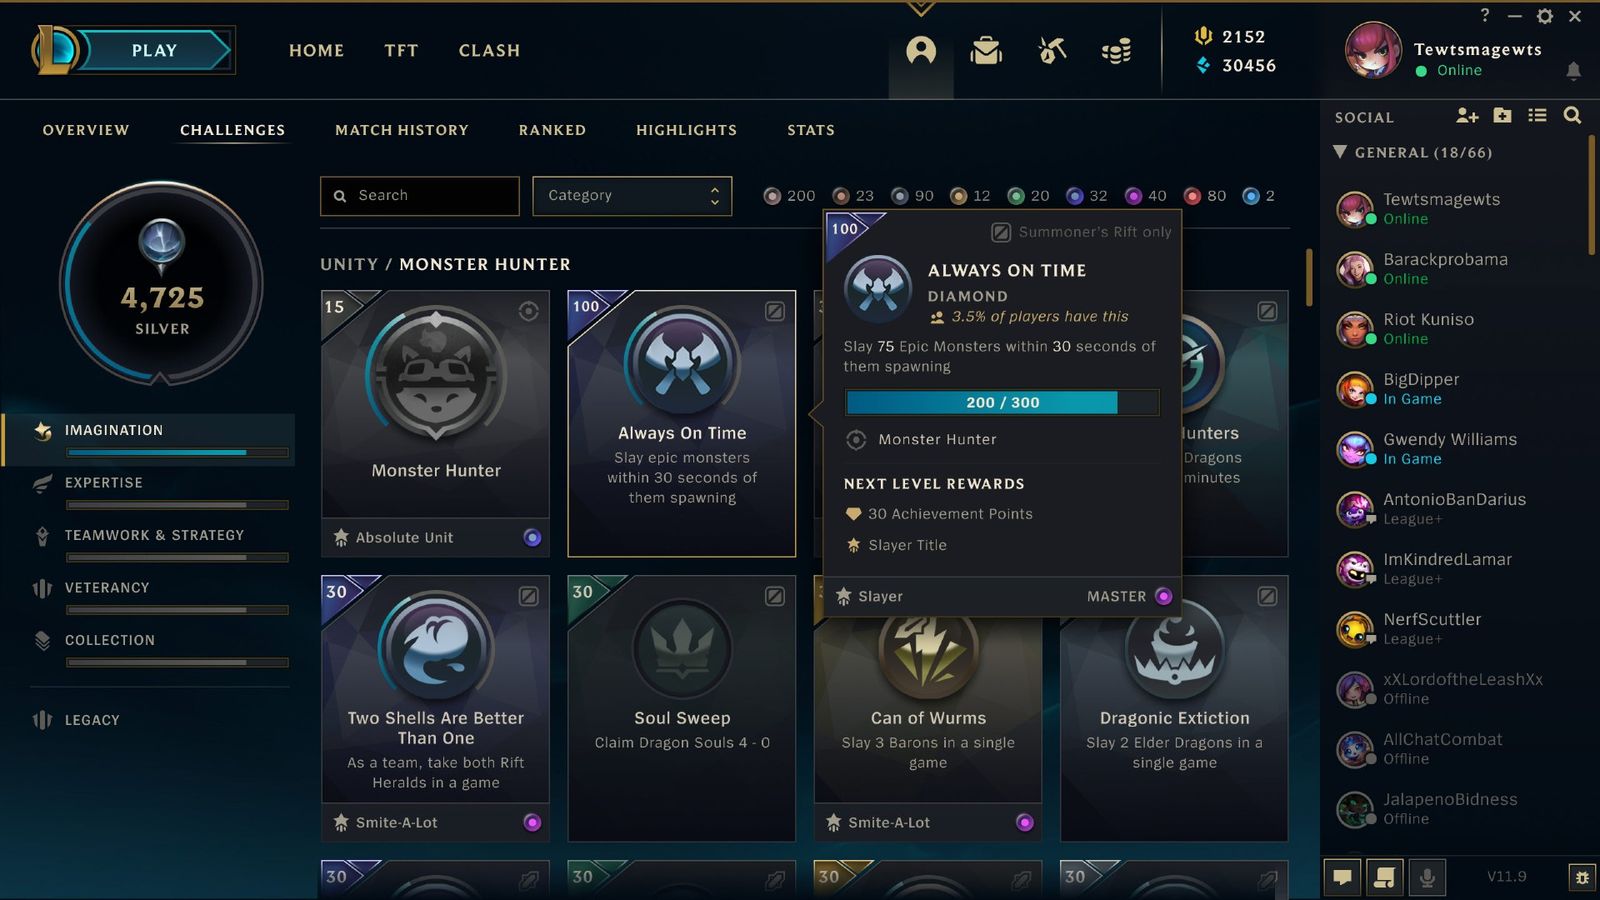 Image of the challenges menu in League of Legends.